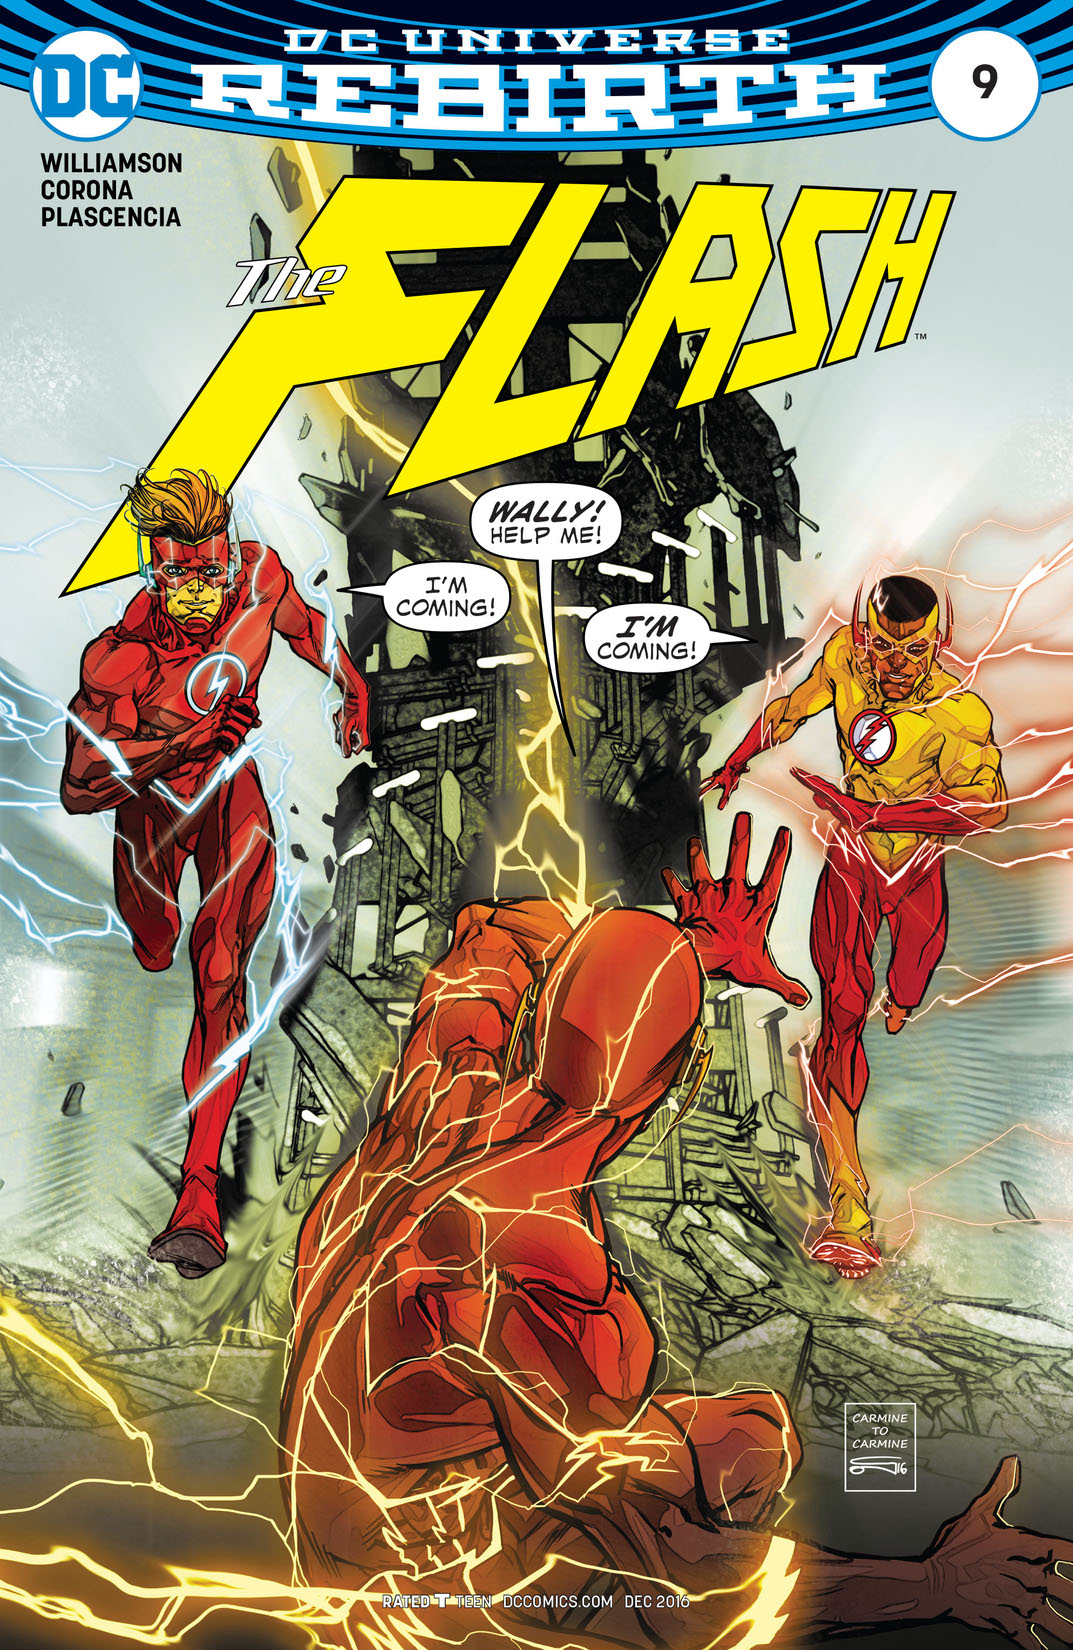 The Flash (2016-) #9 preview images